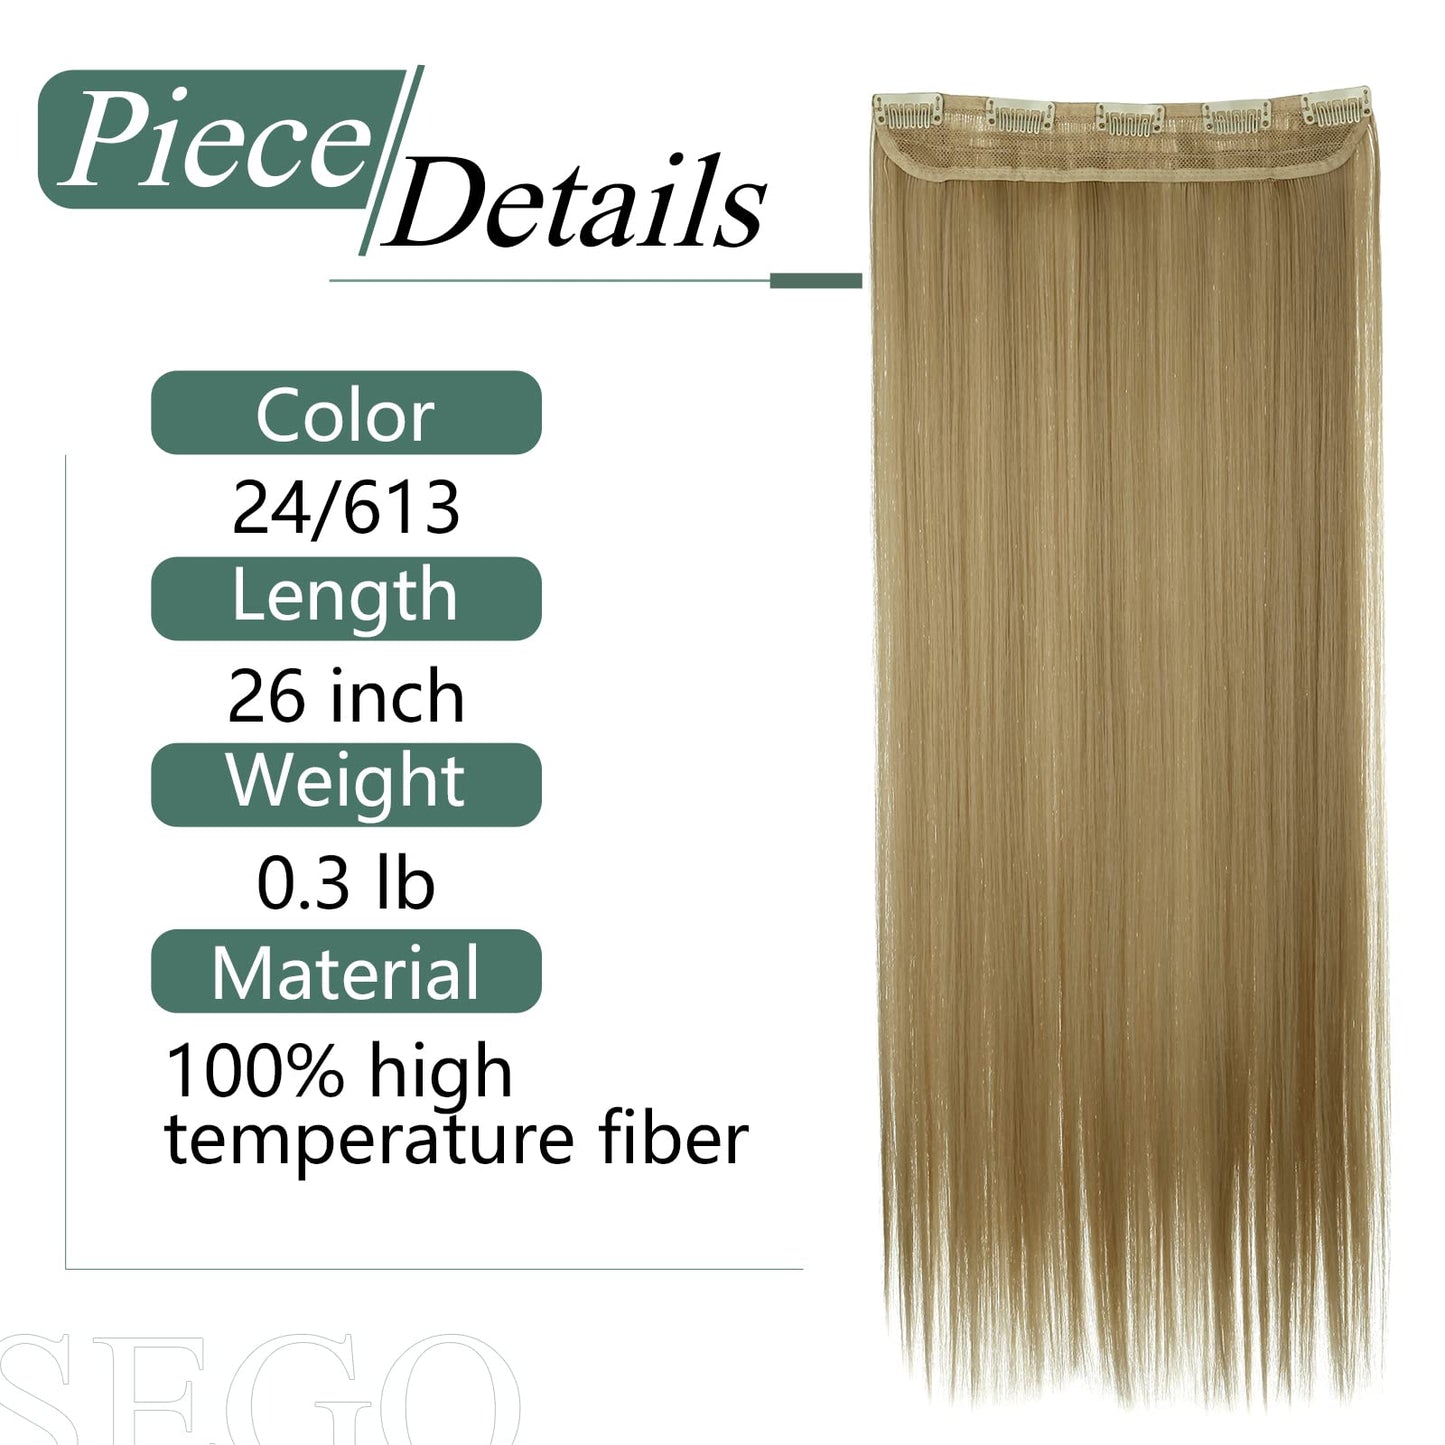 SEGO Hair Extension Clips 26 inch Long Straight Hairpieces Natural Heat Resistant Synthetic Thick 5 Secure Clip in Hair Extensions for Wome